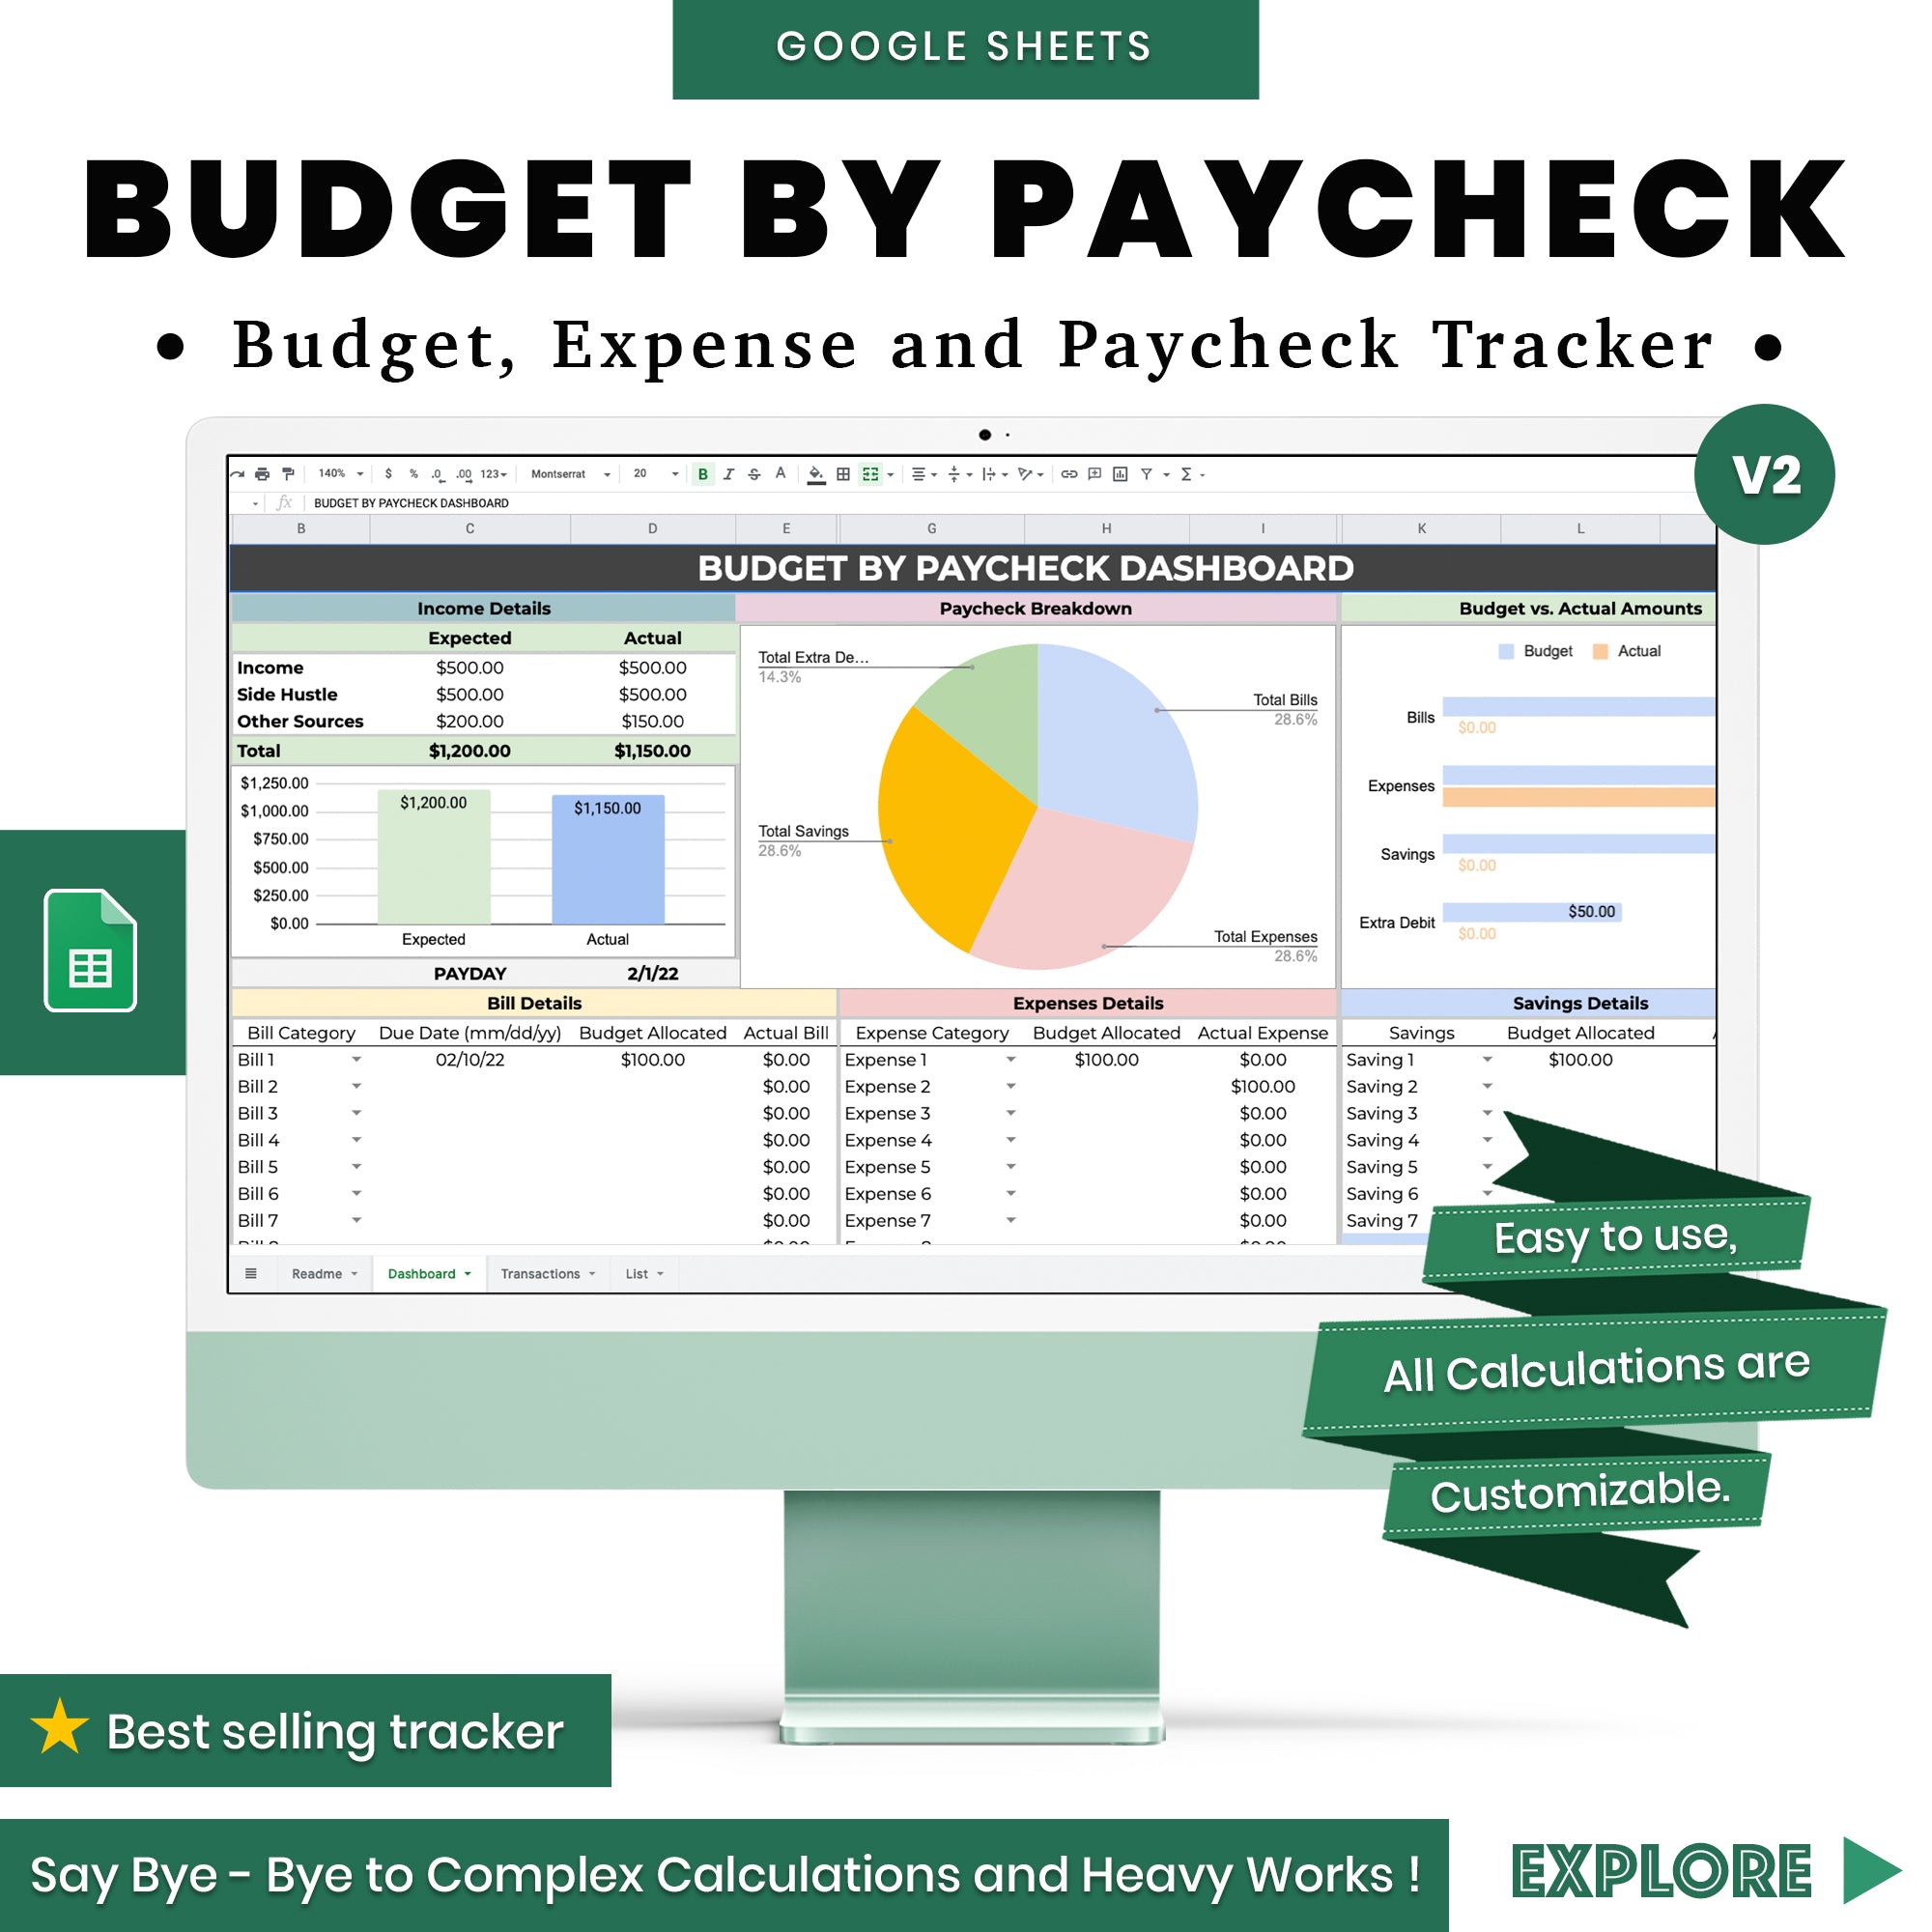 BudgetMaster: Budget by Paycheck Guide